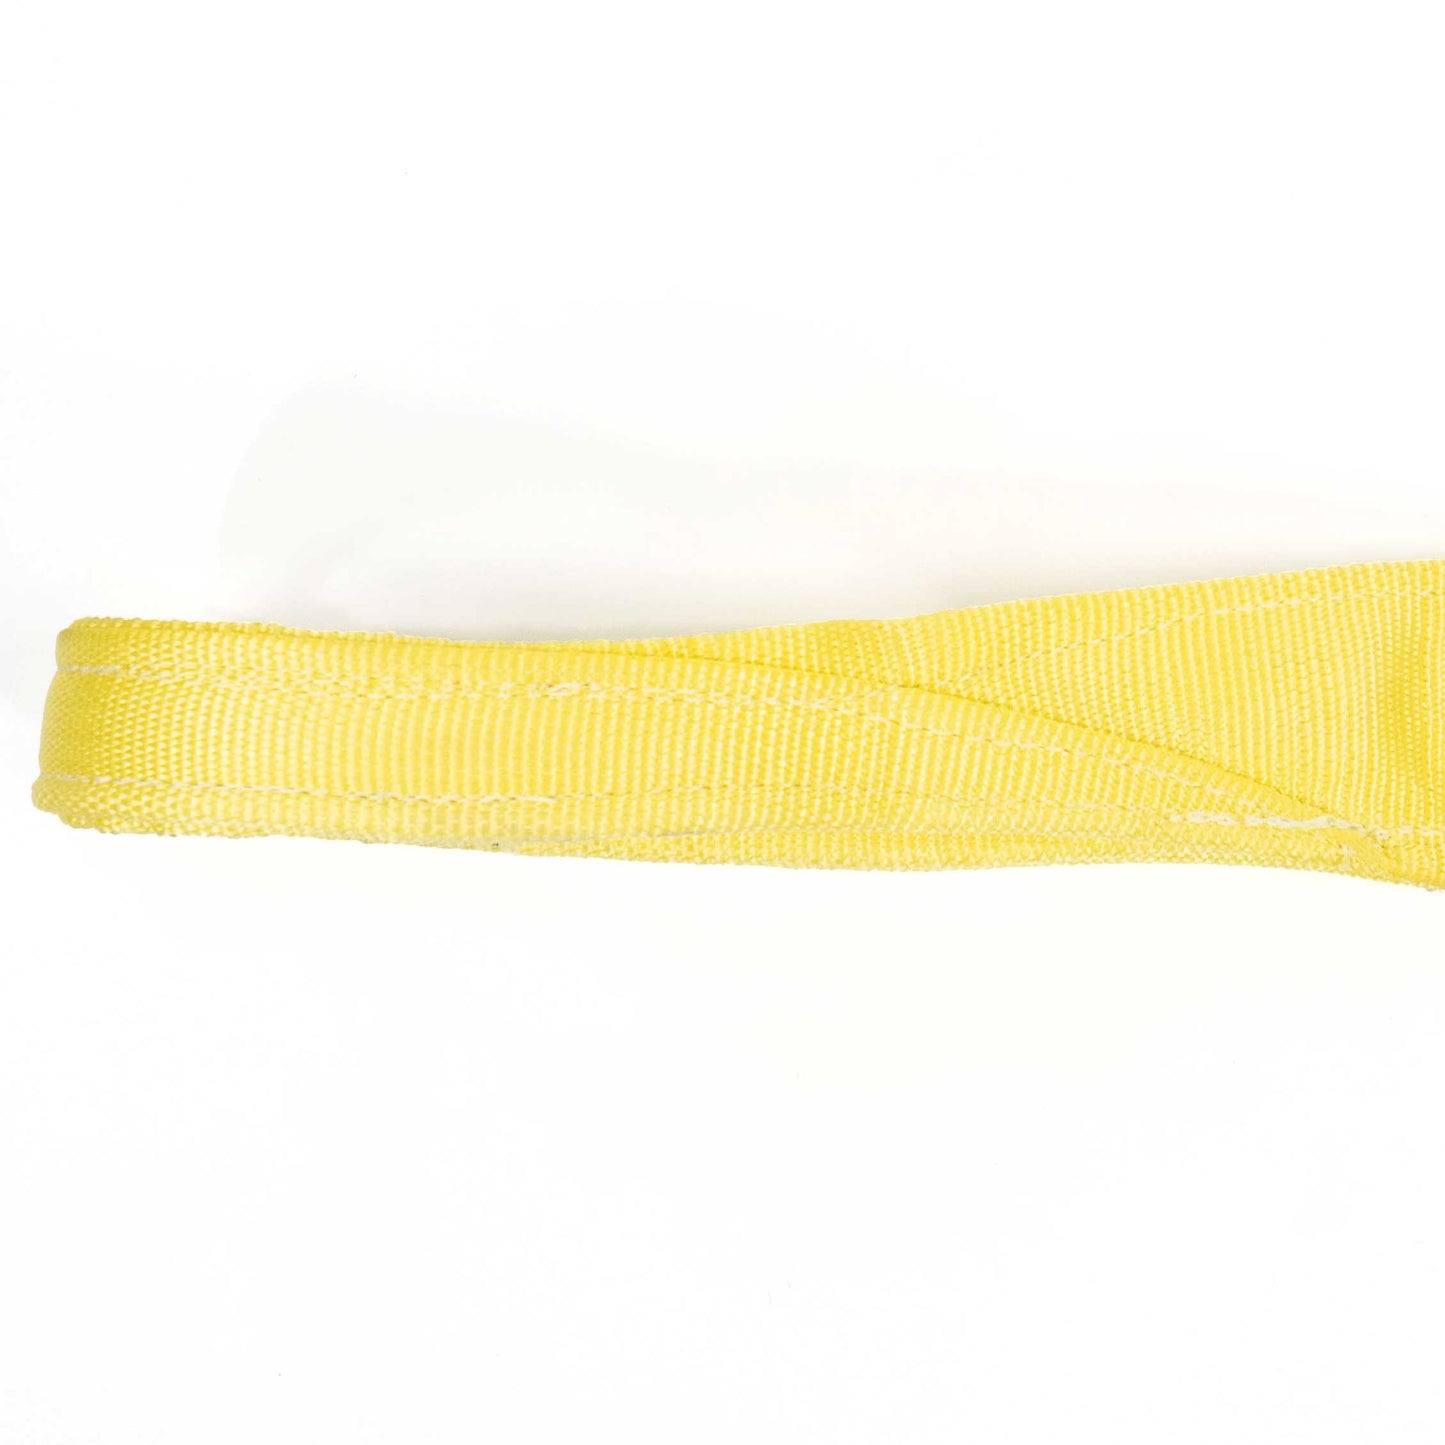 4" x 20' Heavy Duty Recovery Strap with Reinforced Cordura Eyes - 4 Ply | 51,000 WLL